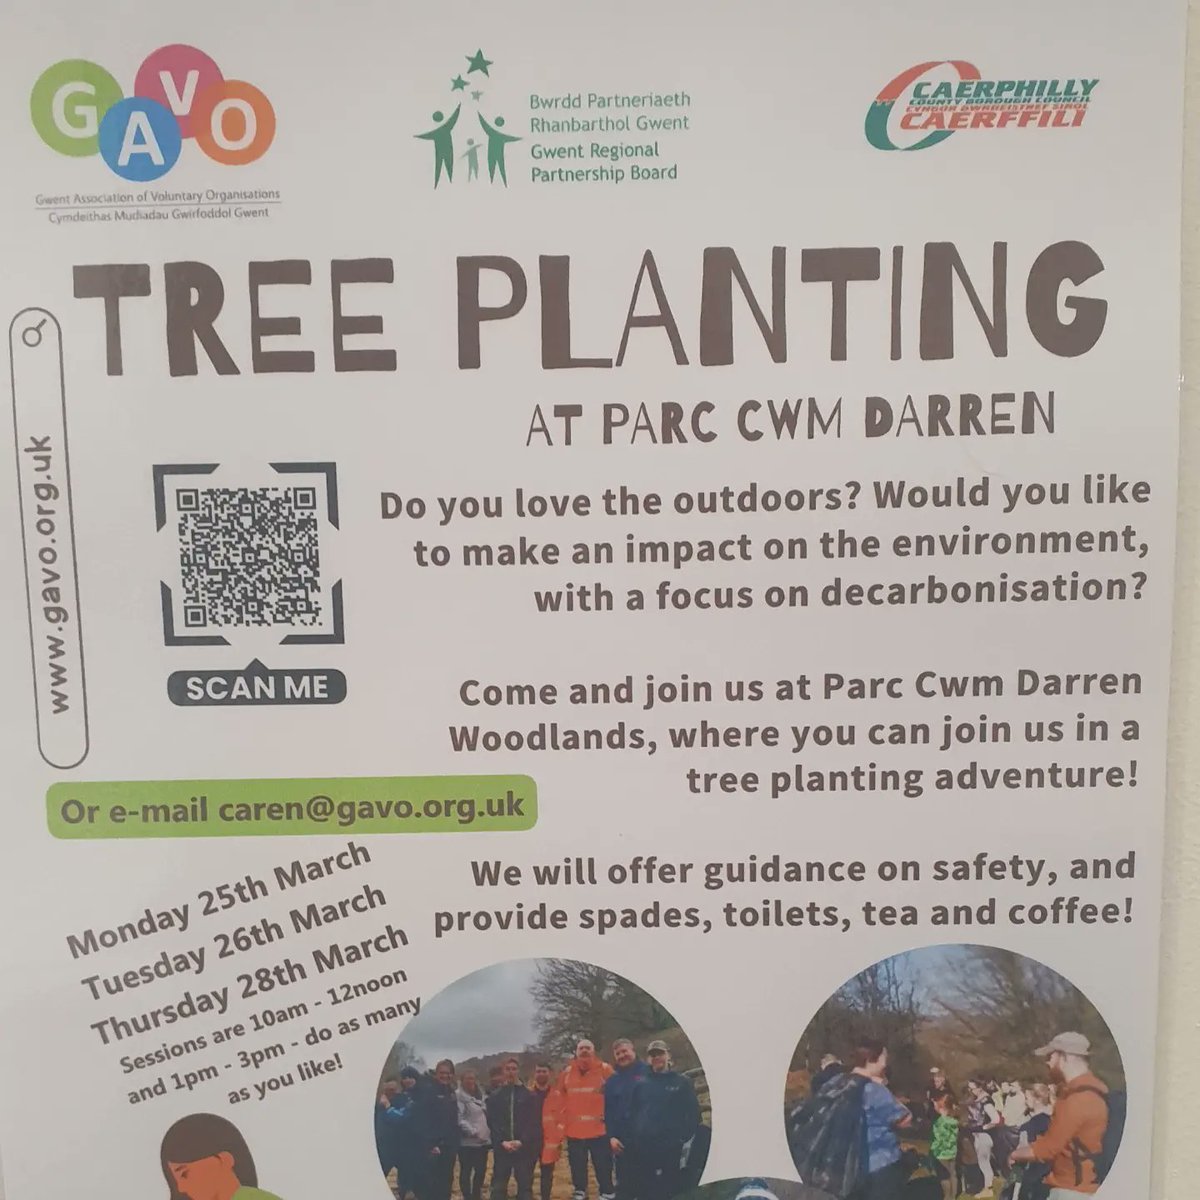 Do you have a few hours to spare this March and enjoy being outside? Volunteers needed for planting trees across the Caerphilly Borough. #fourteenlocks #mbact #volunteers #gavo #trees #environment